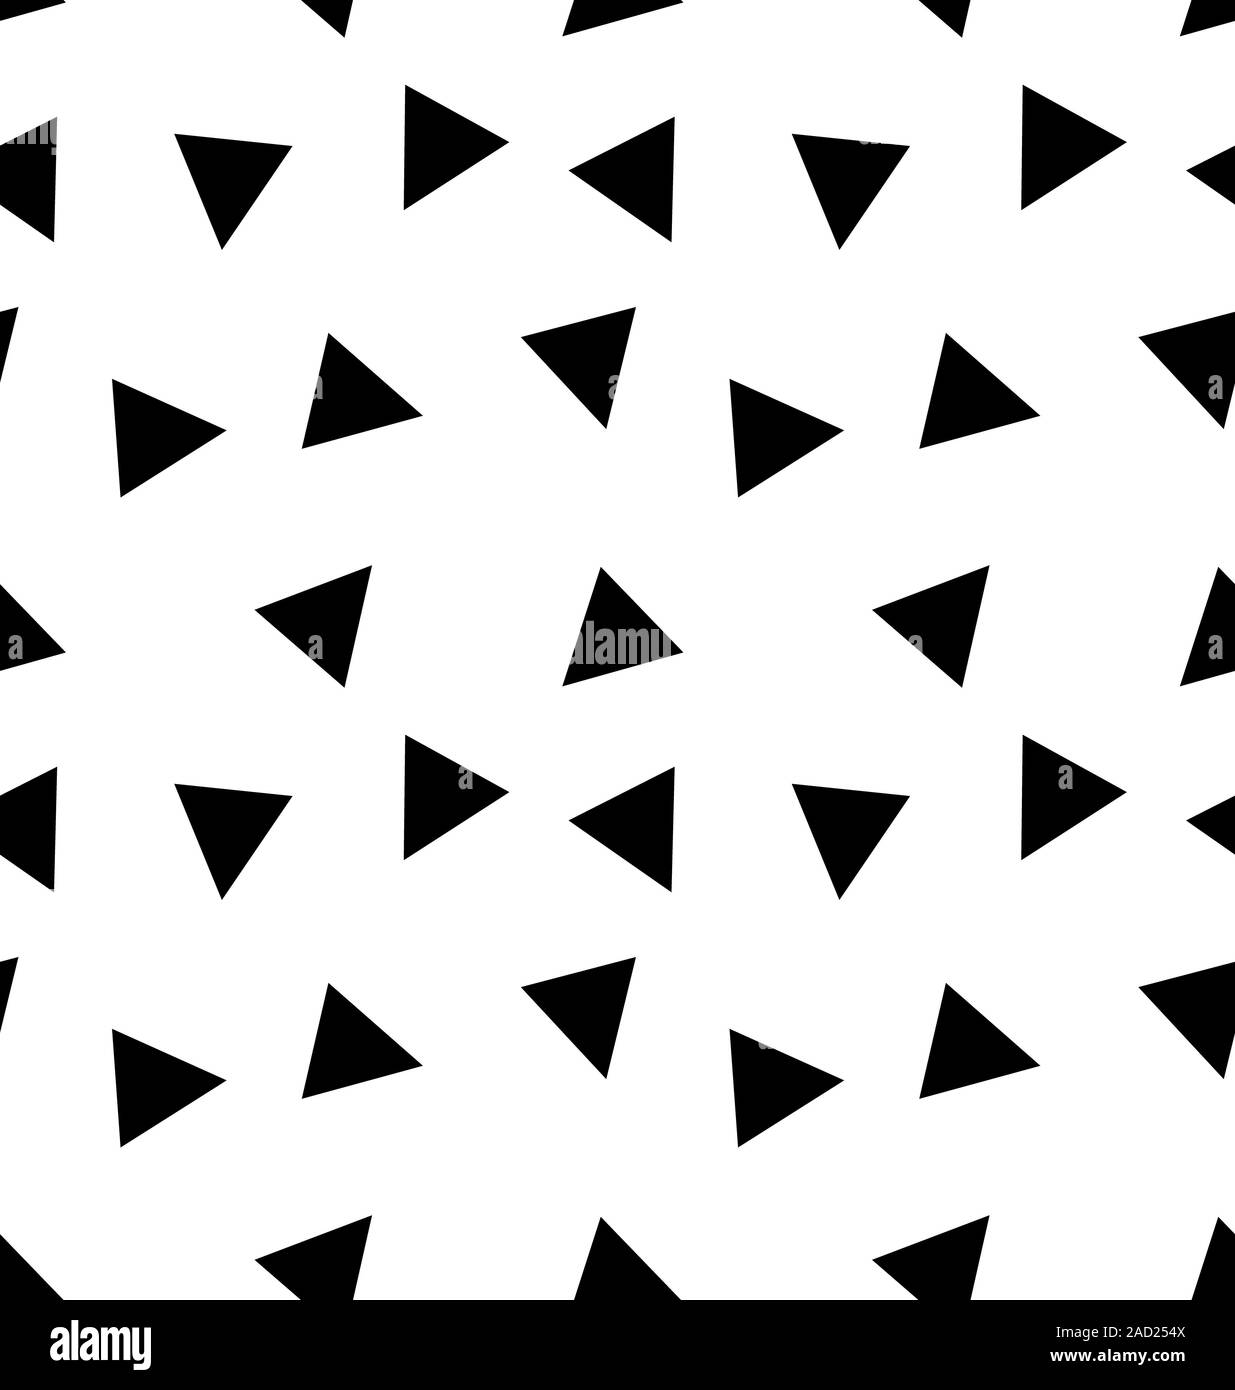 Triangle pattern Black and White Stock Photos & Images - Alamy